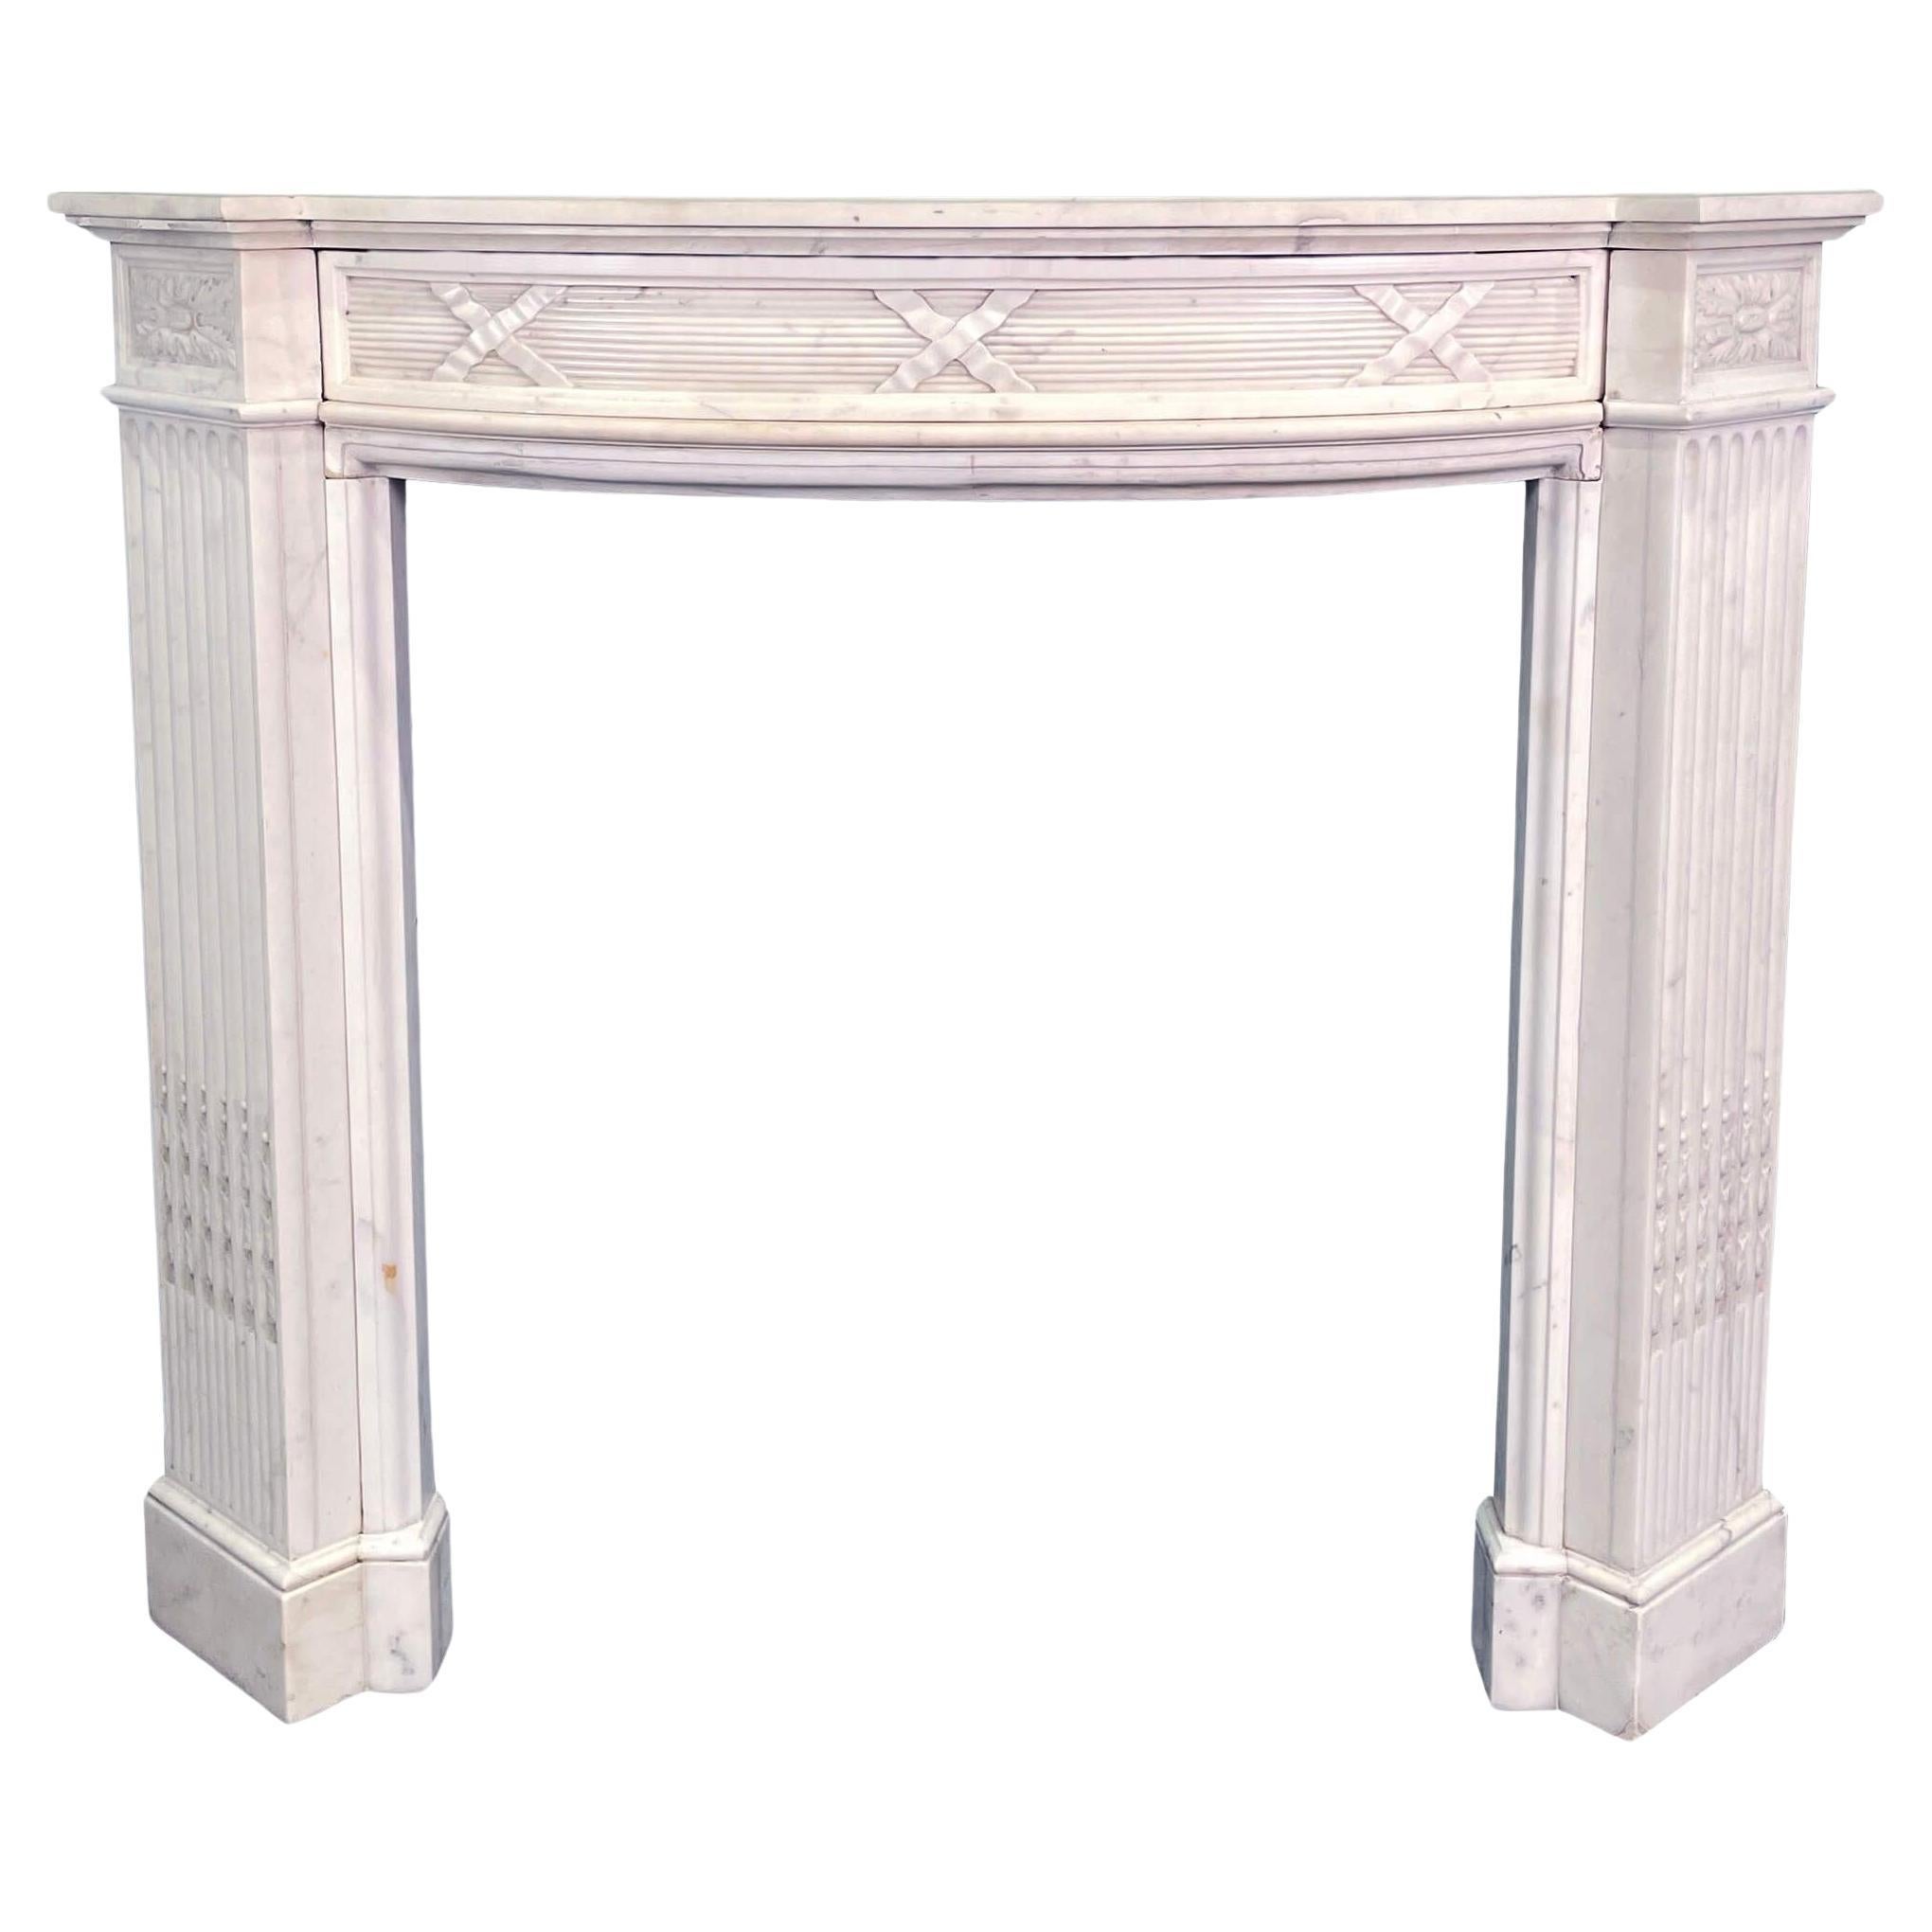 Bowfronted Antique White Marble Fire Mantel For Sale